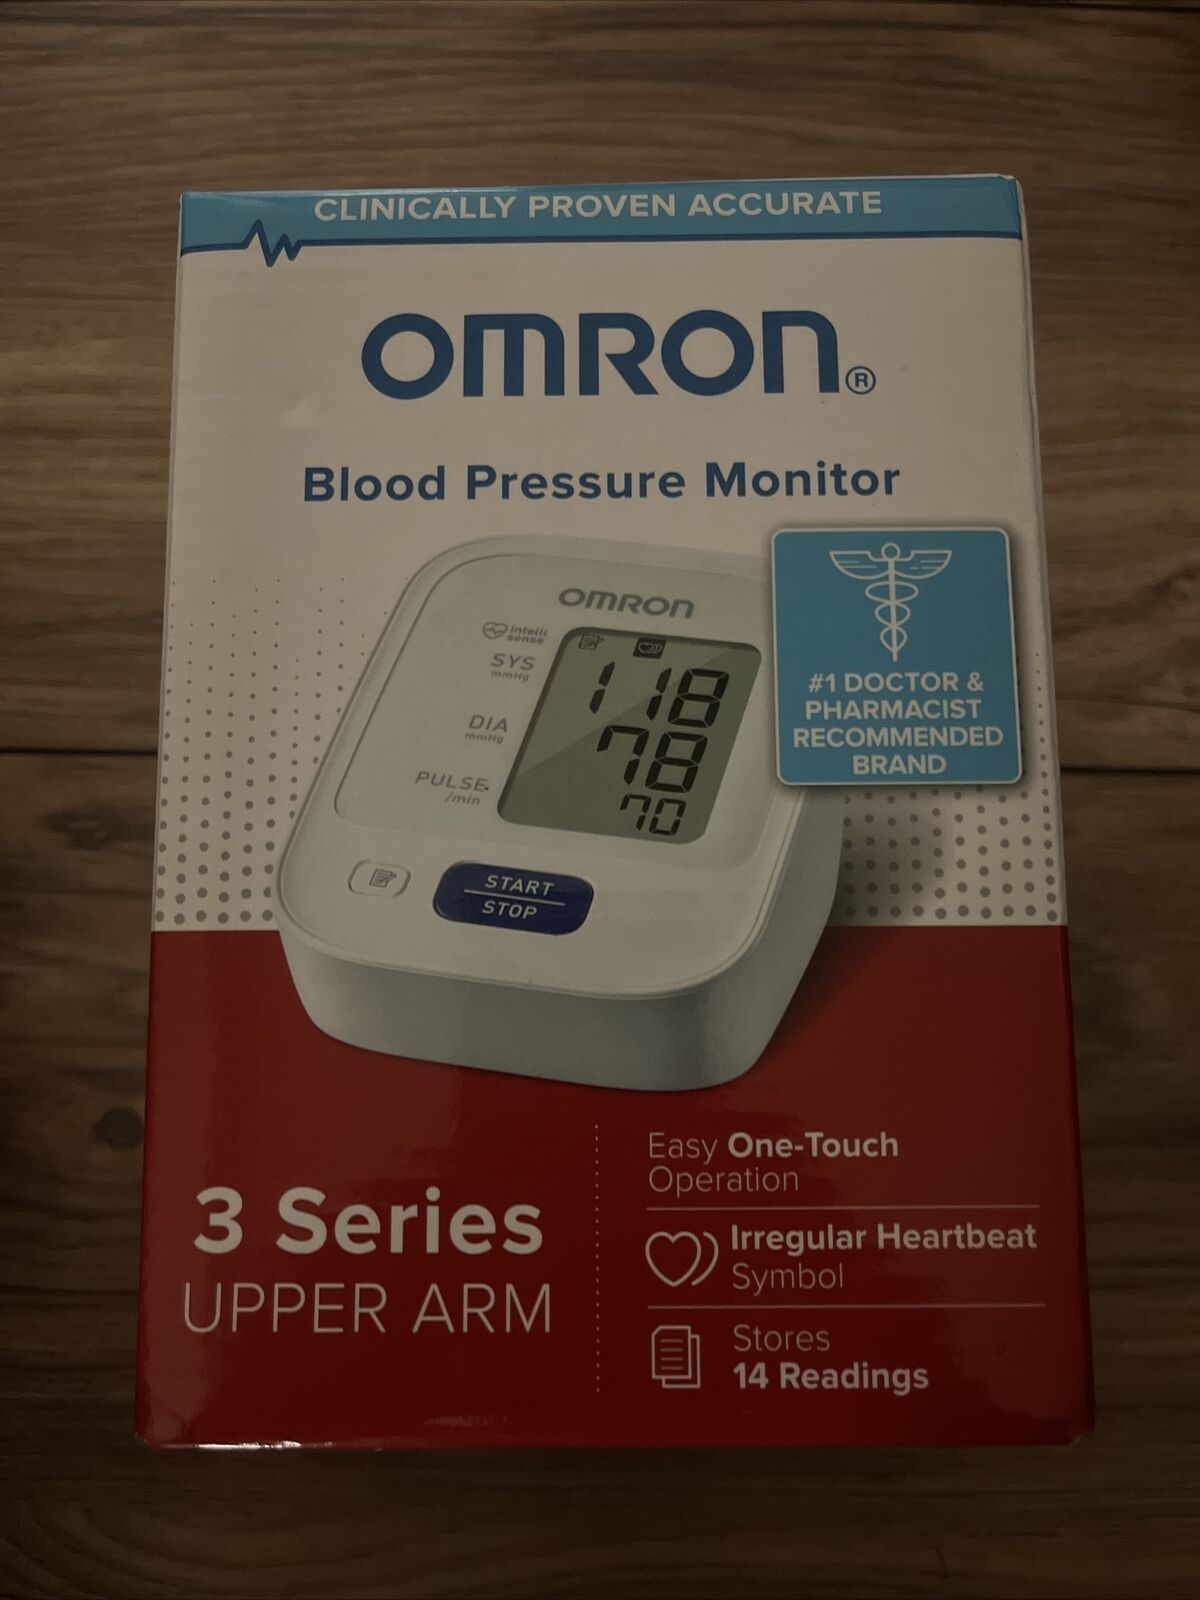 Omron - 3 Series - Automatic Upper Arm Blood Pressure Monitor ON SALE AT BEST BUY!